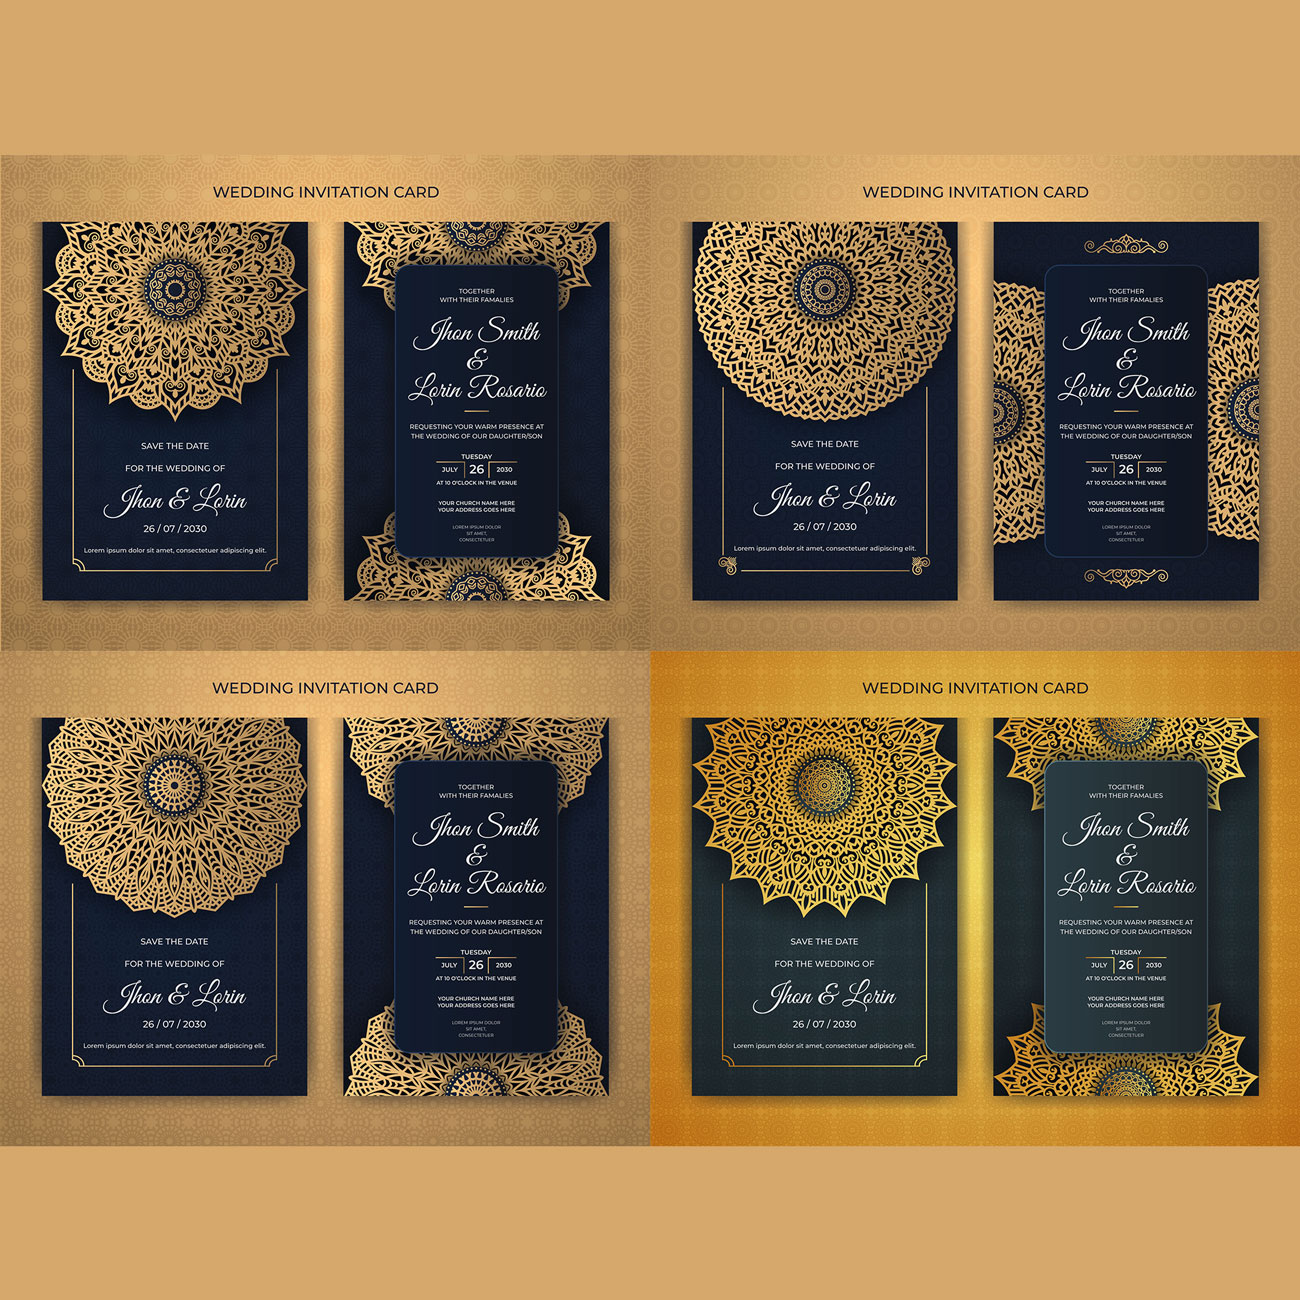 4 In One Luxury Wedding Invitation Card Design Only In $7 preview image.